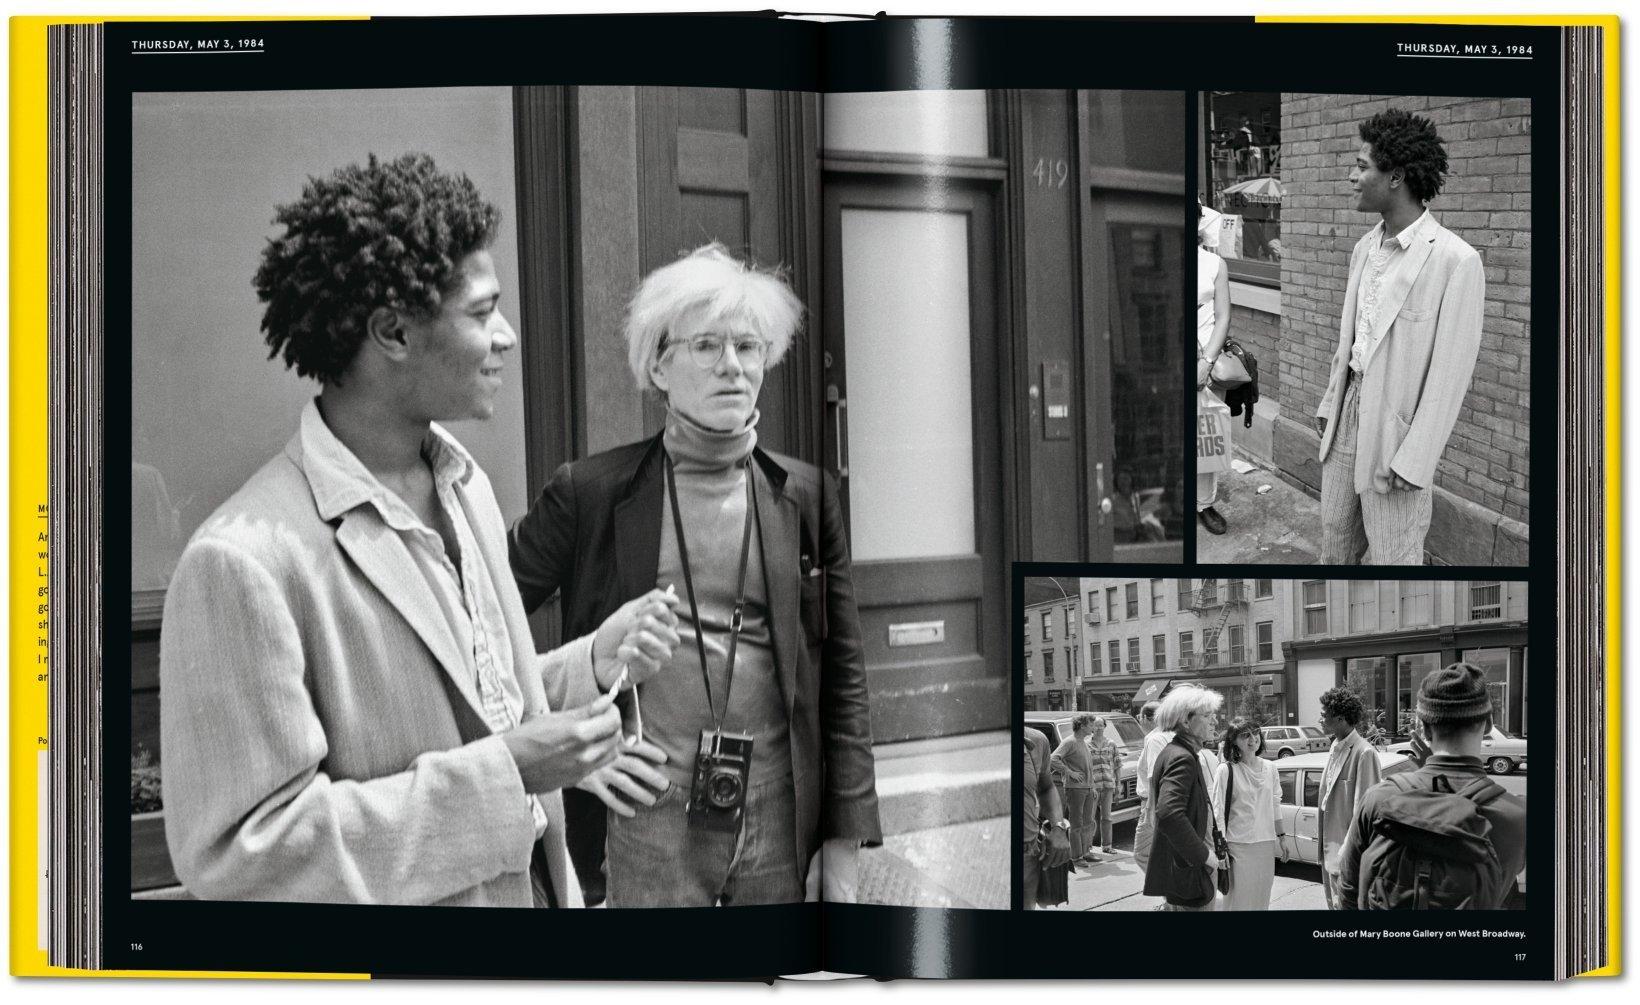 20th Century Warhol on Basquiat, the Iconic Relationship Told in Andy Warhol’s Words and Pict